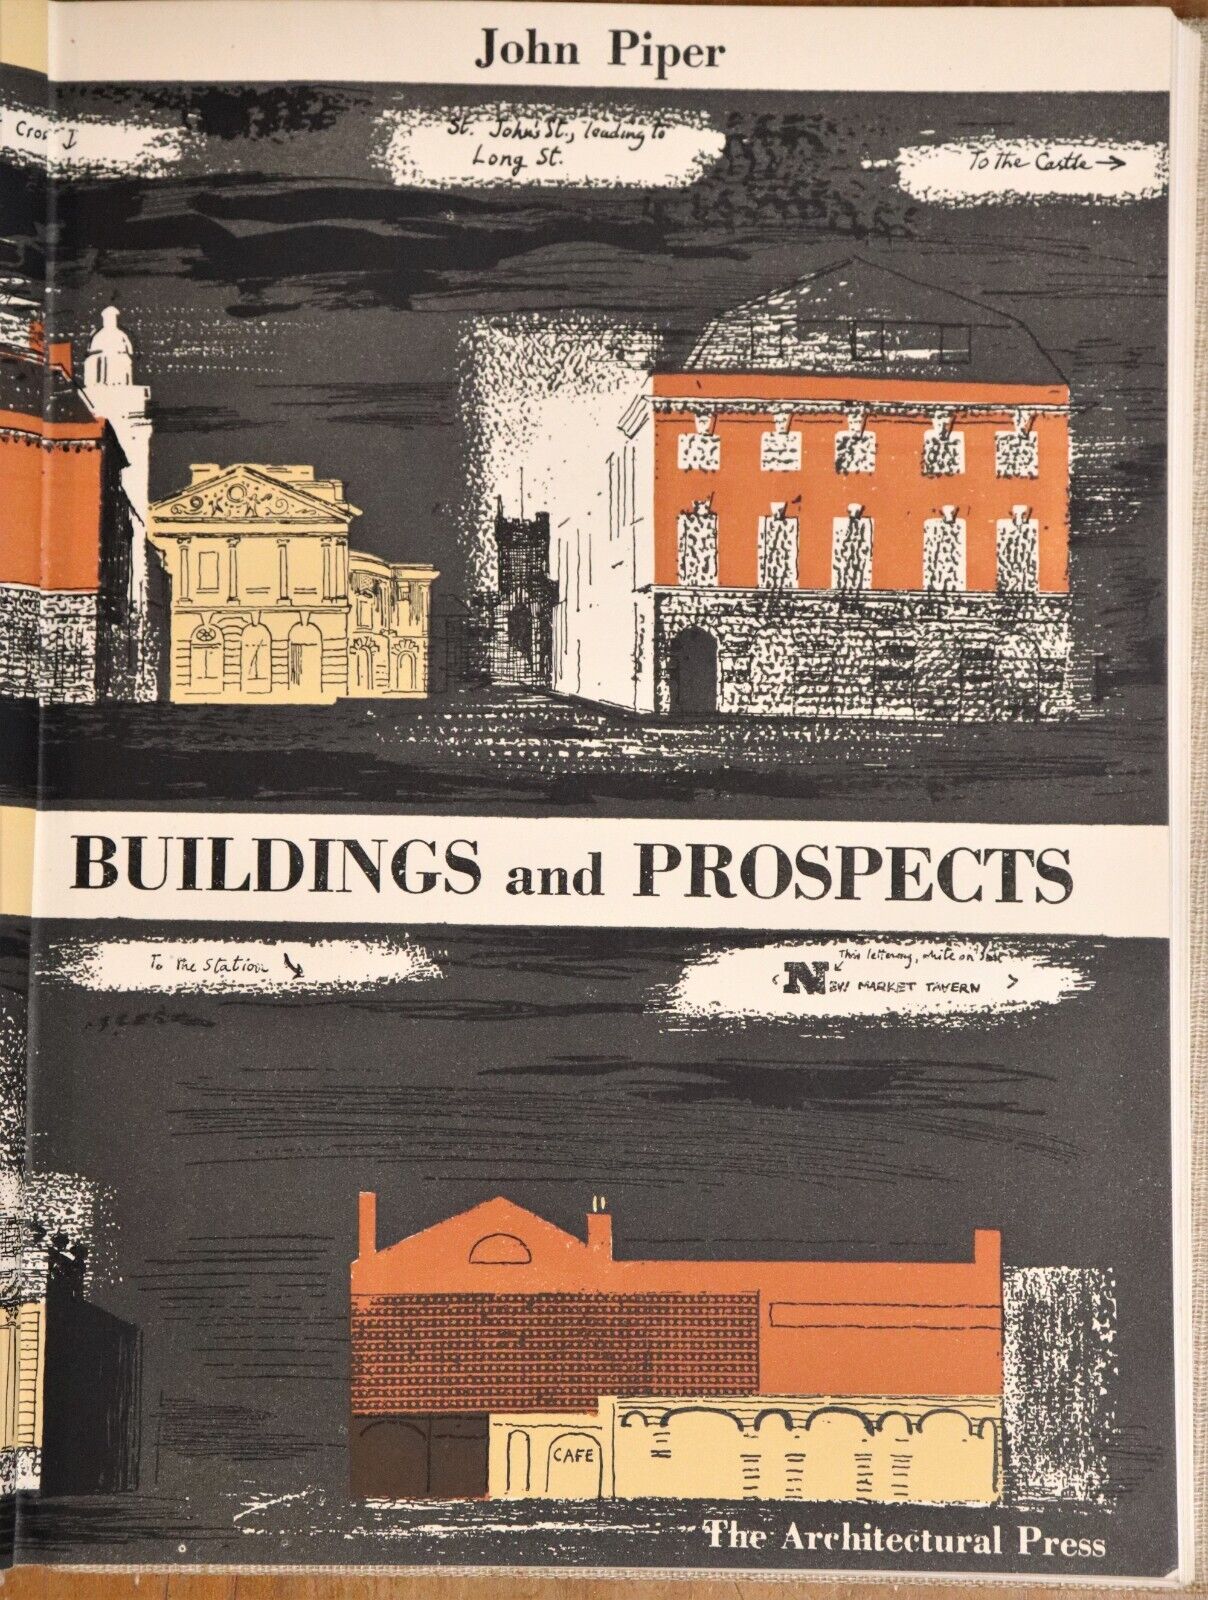 Buildings & Prospects by John Piper - 1948 - 1st Edition - Architecture Book